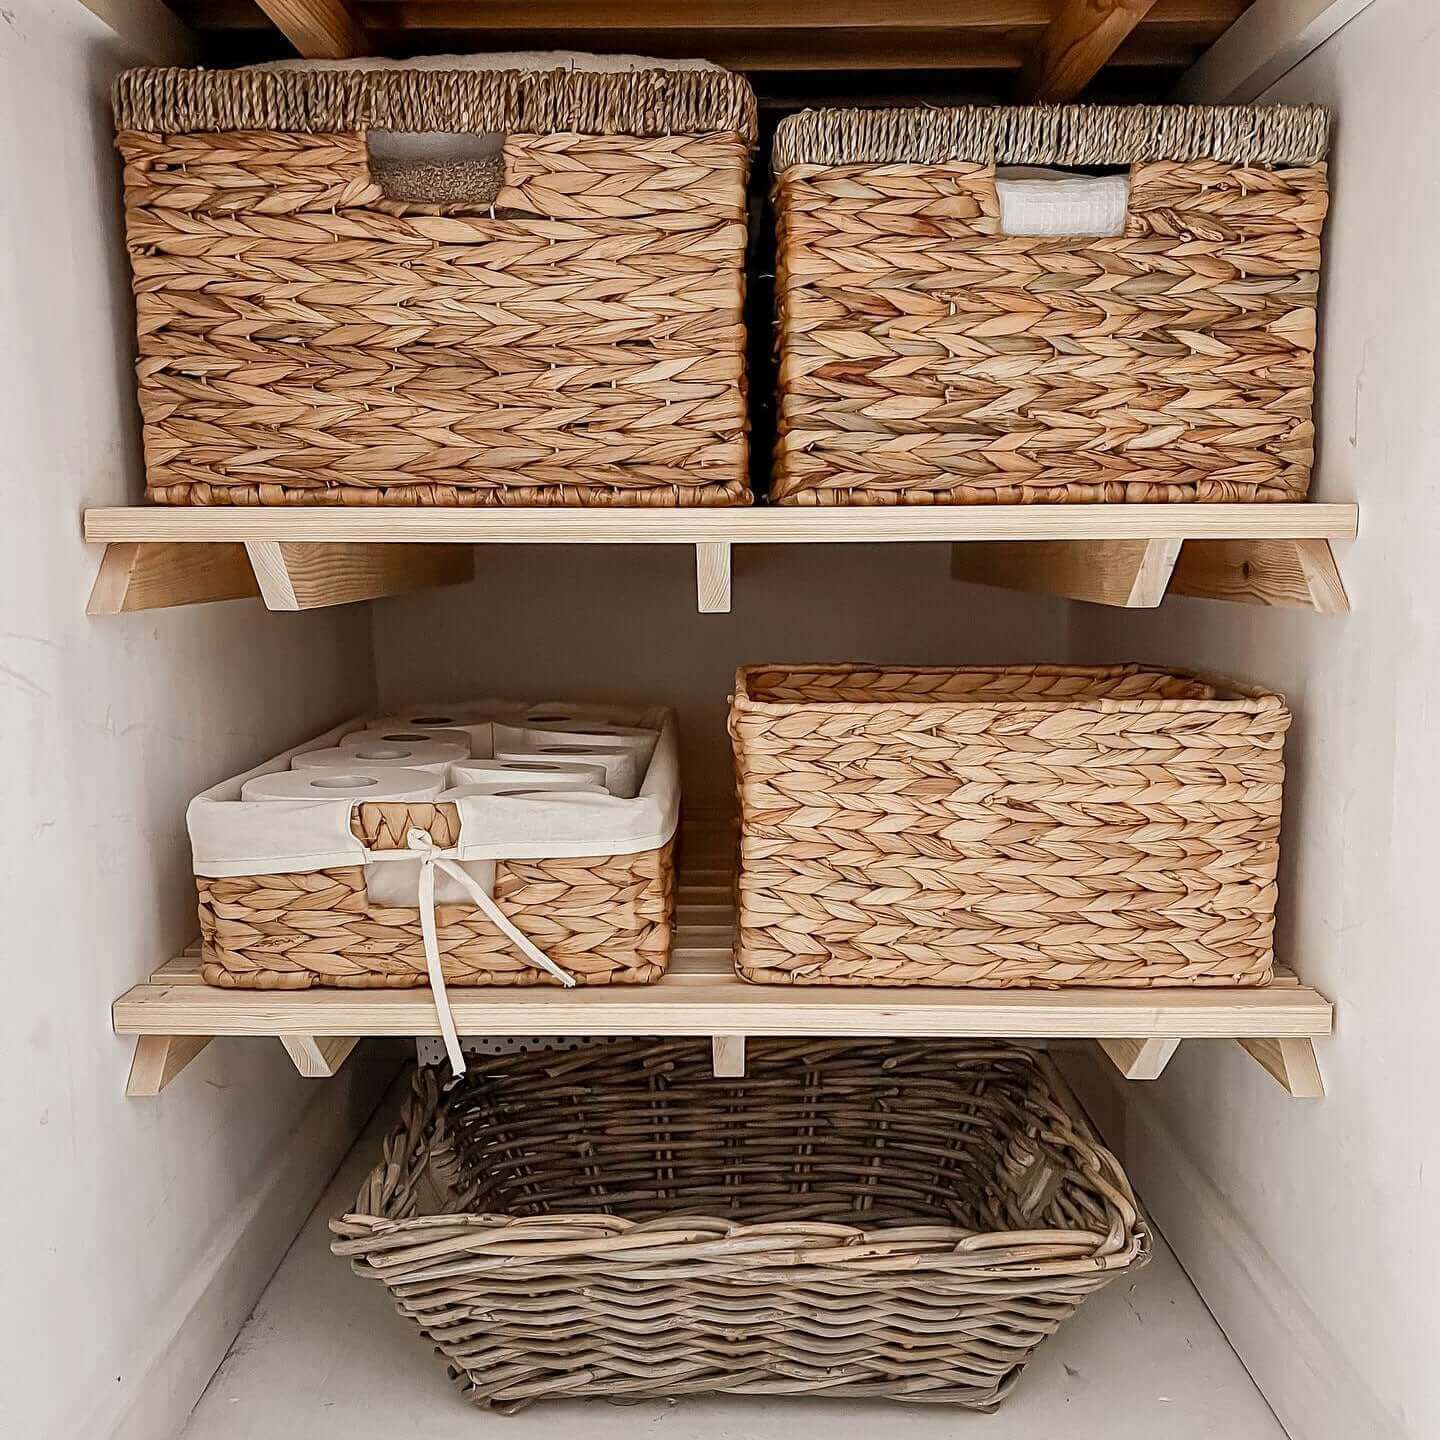 Airing Cupboard Wooden Slatted Shelves - 65 cm by 54 cm